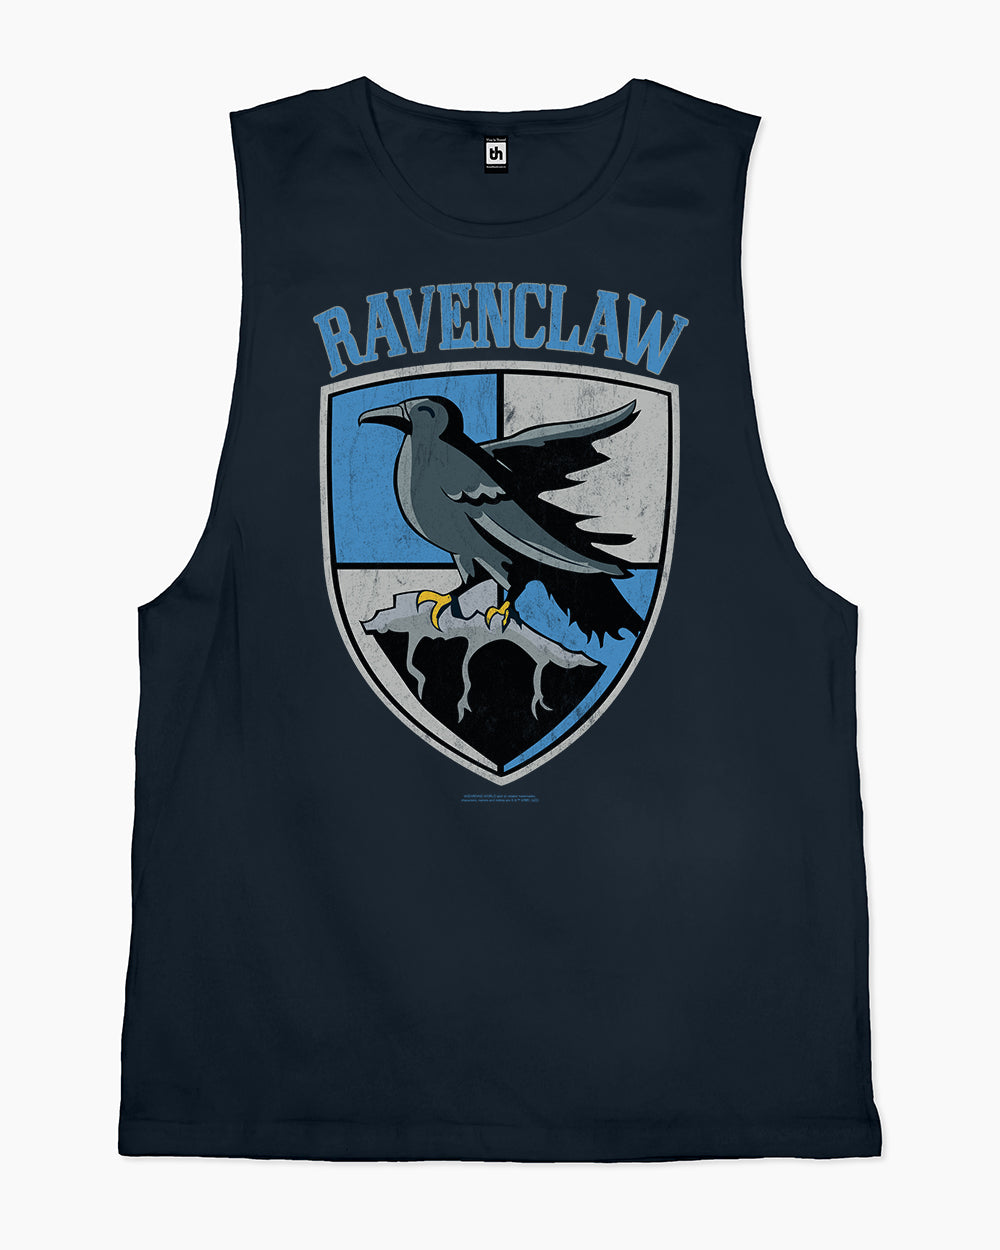 Crest | Harry Potter Merch Hoodie Official | Ravenclaw Threadheads